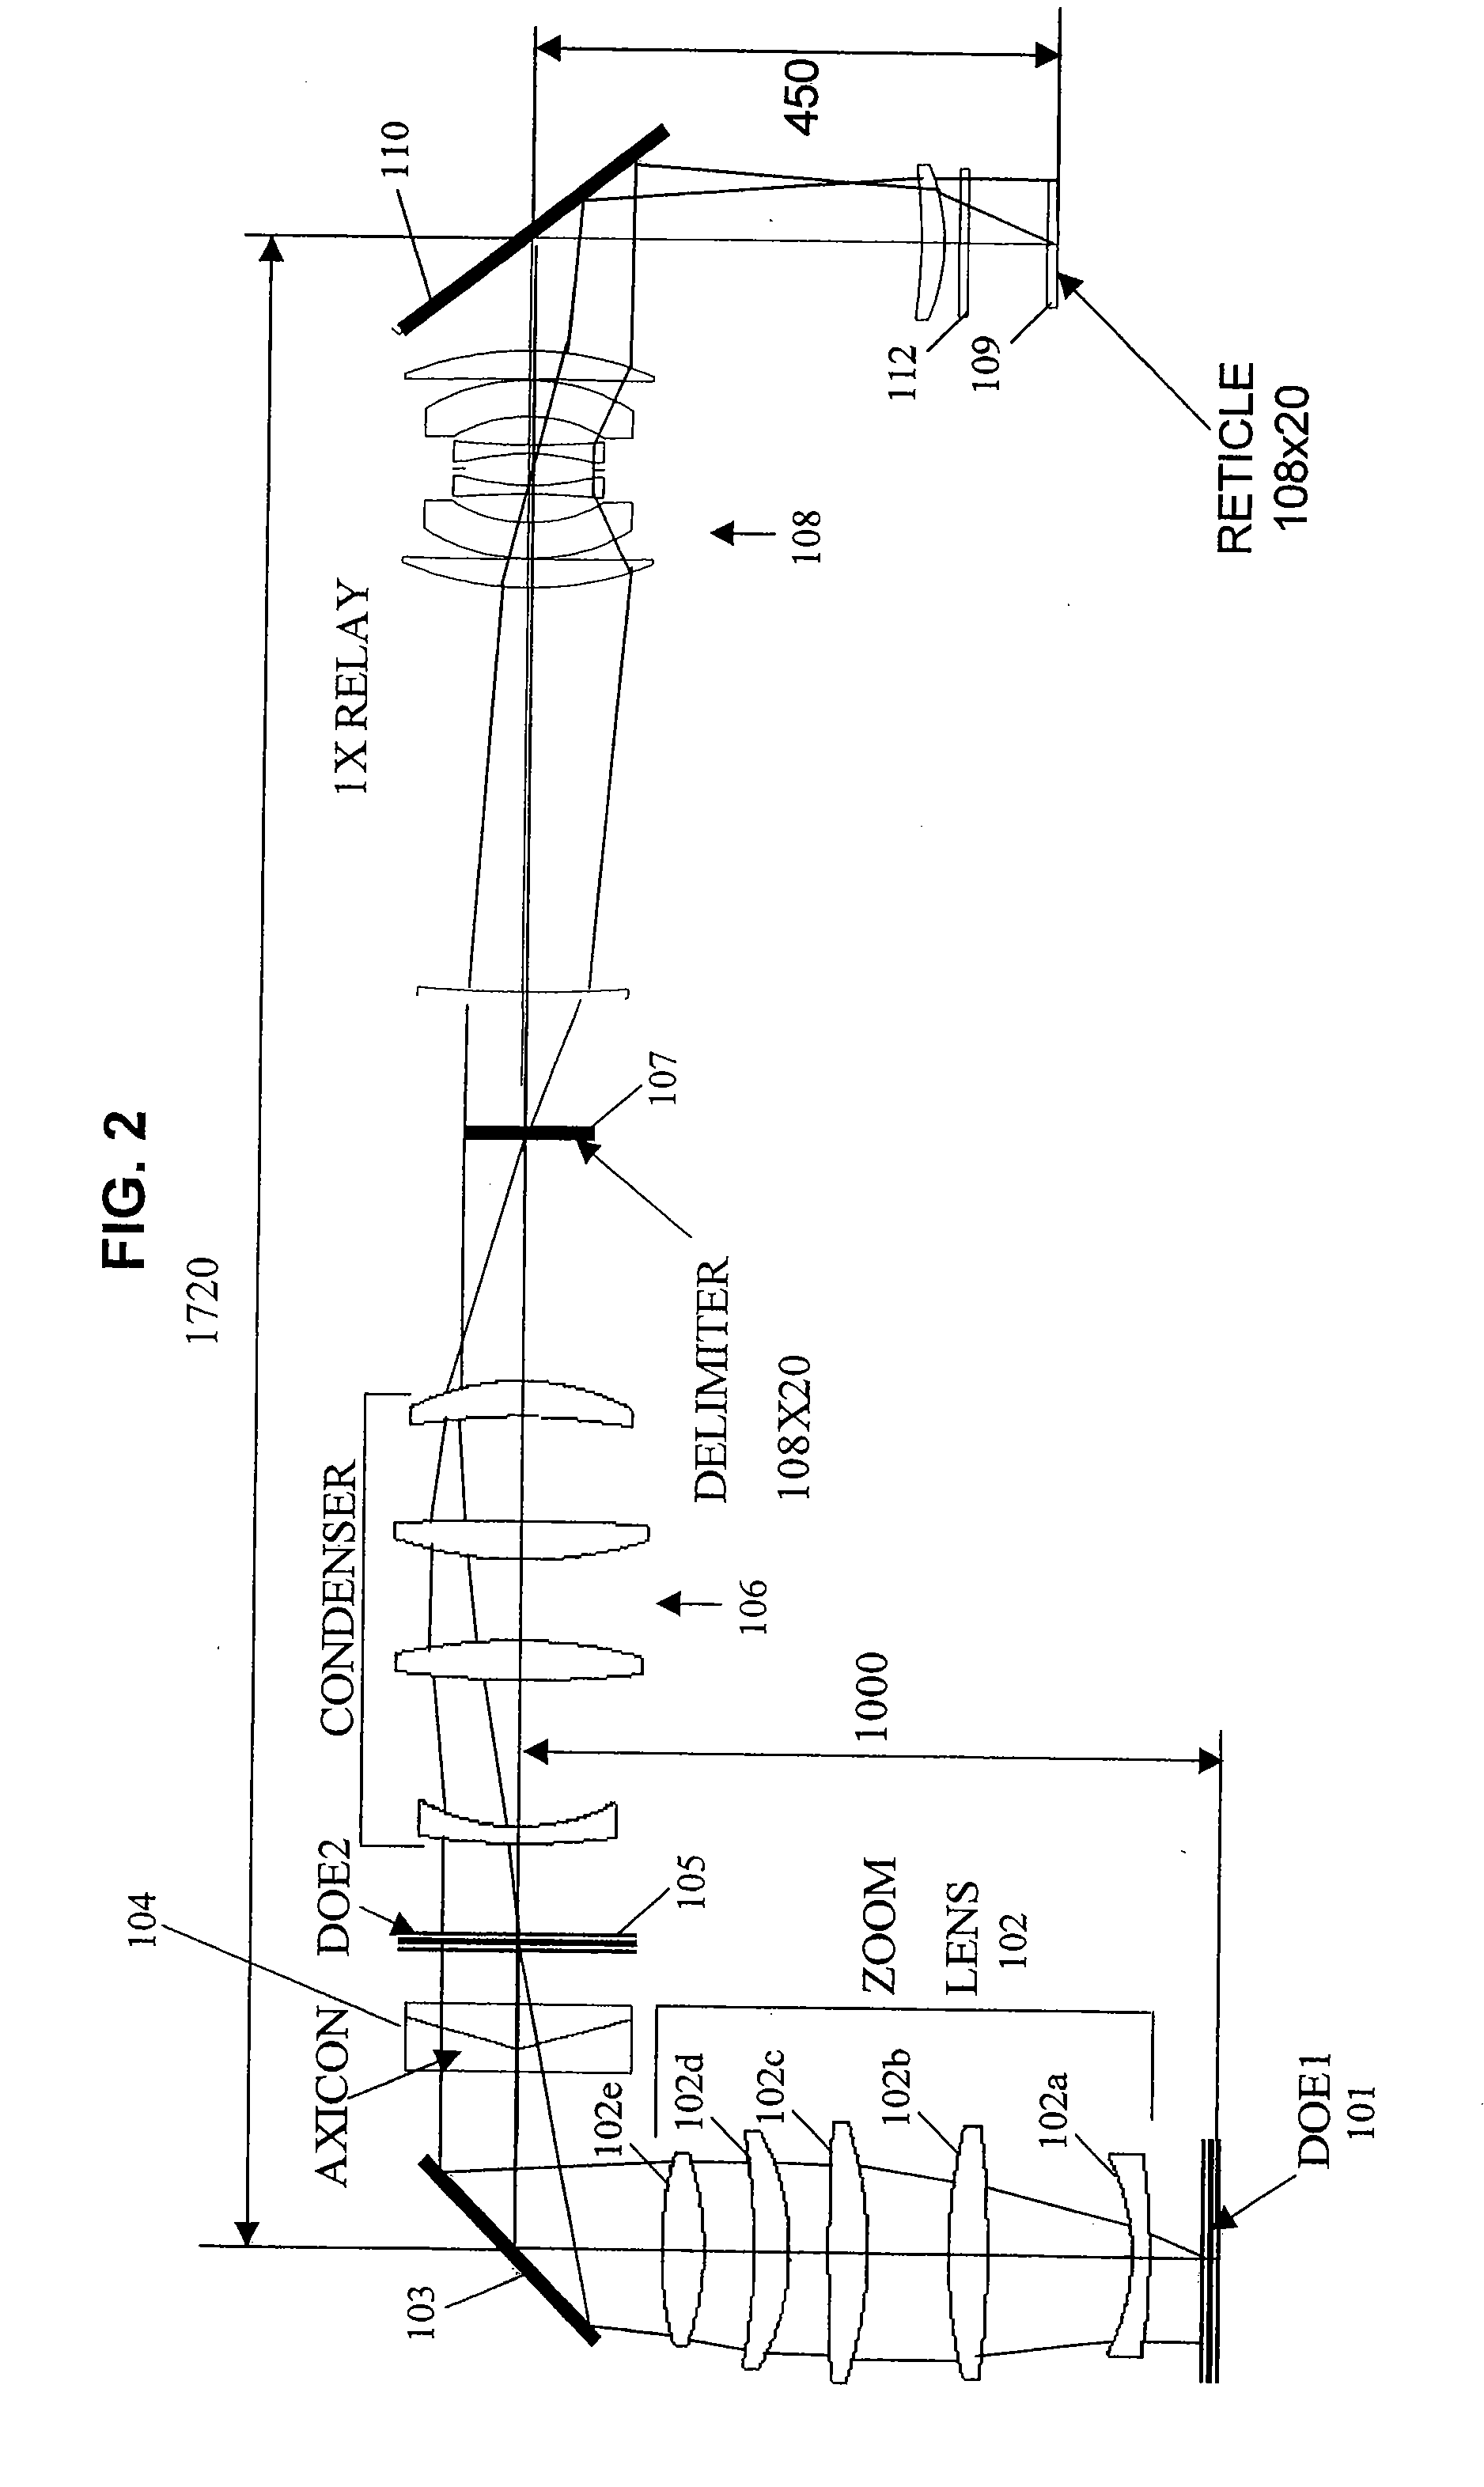 Advanced Illumination System for Use in Microlithography